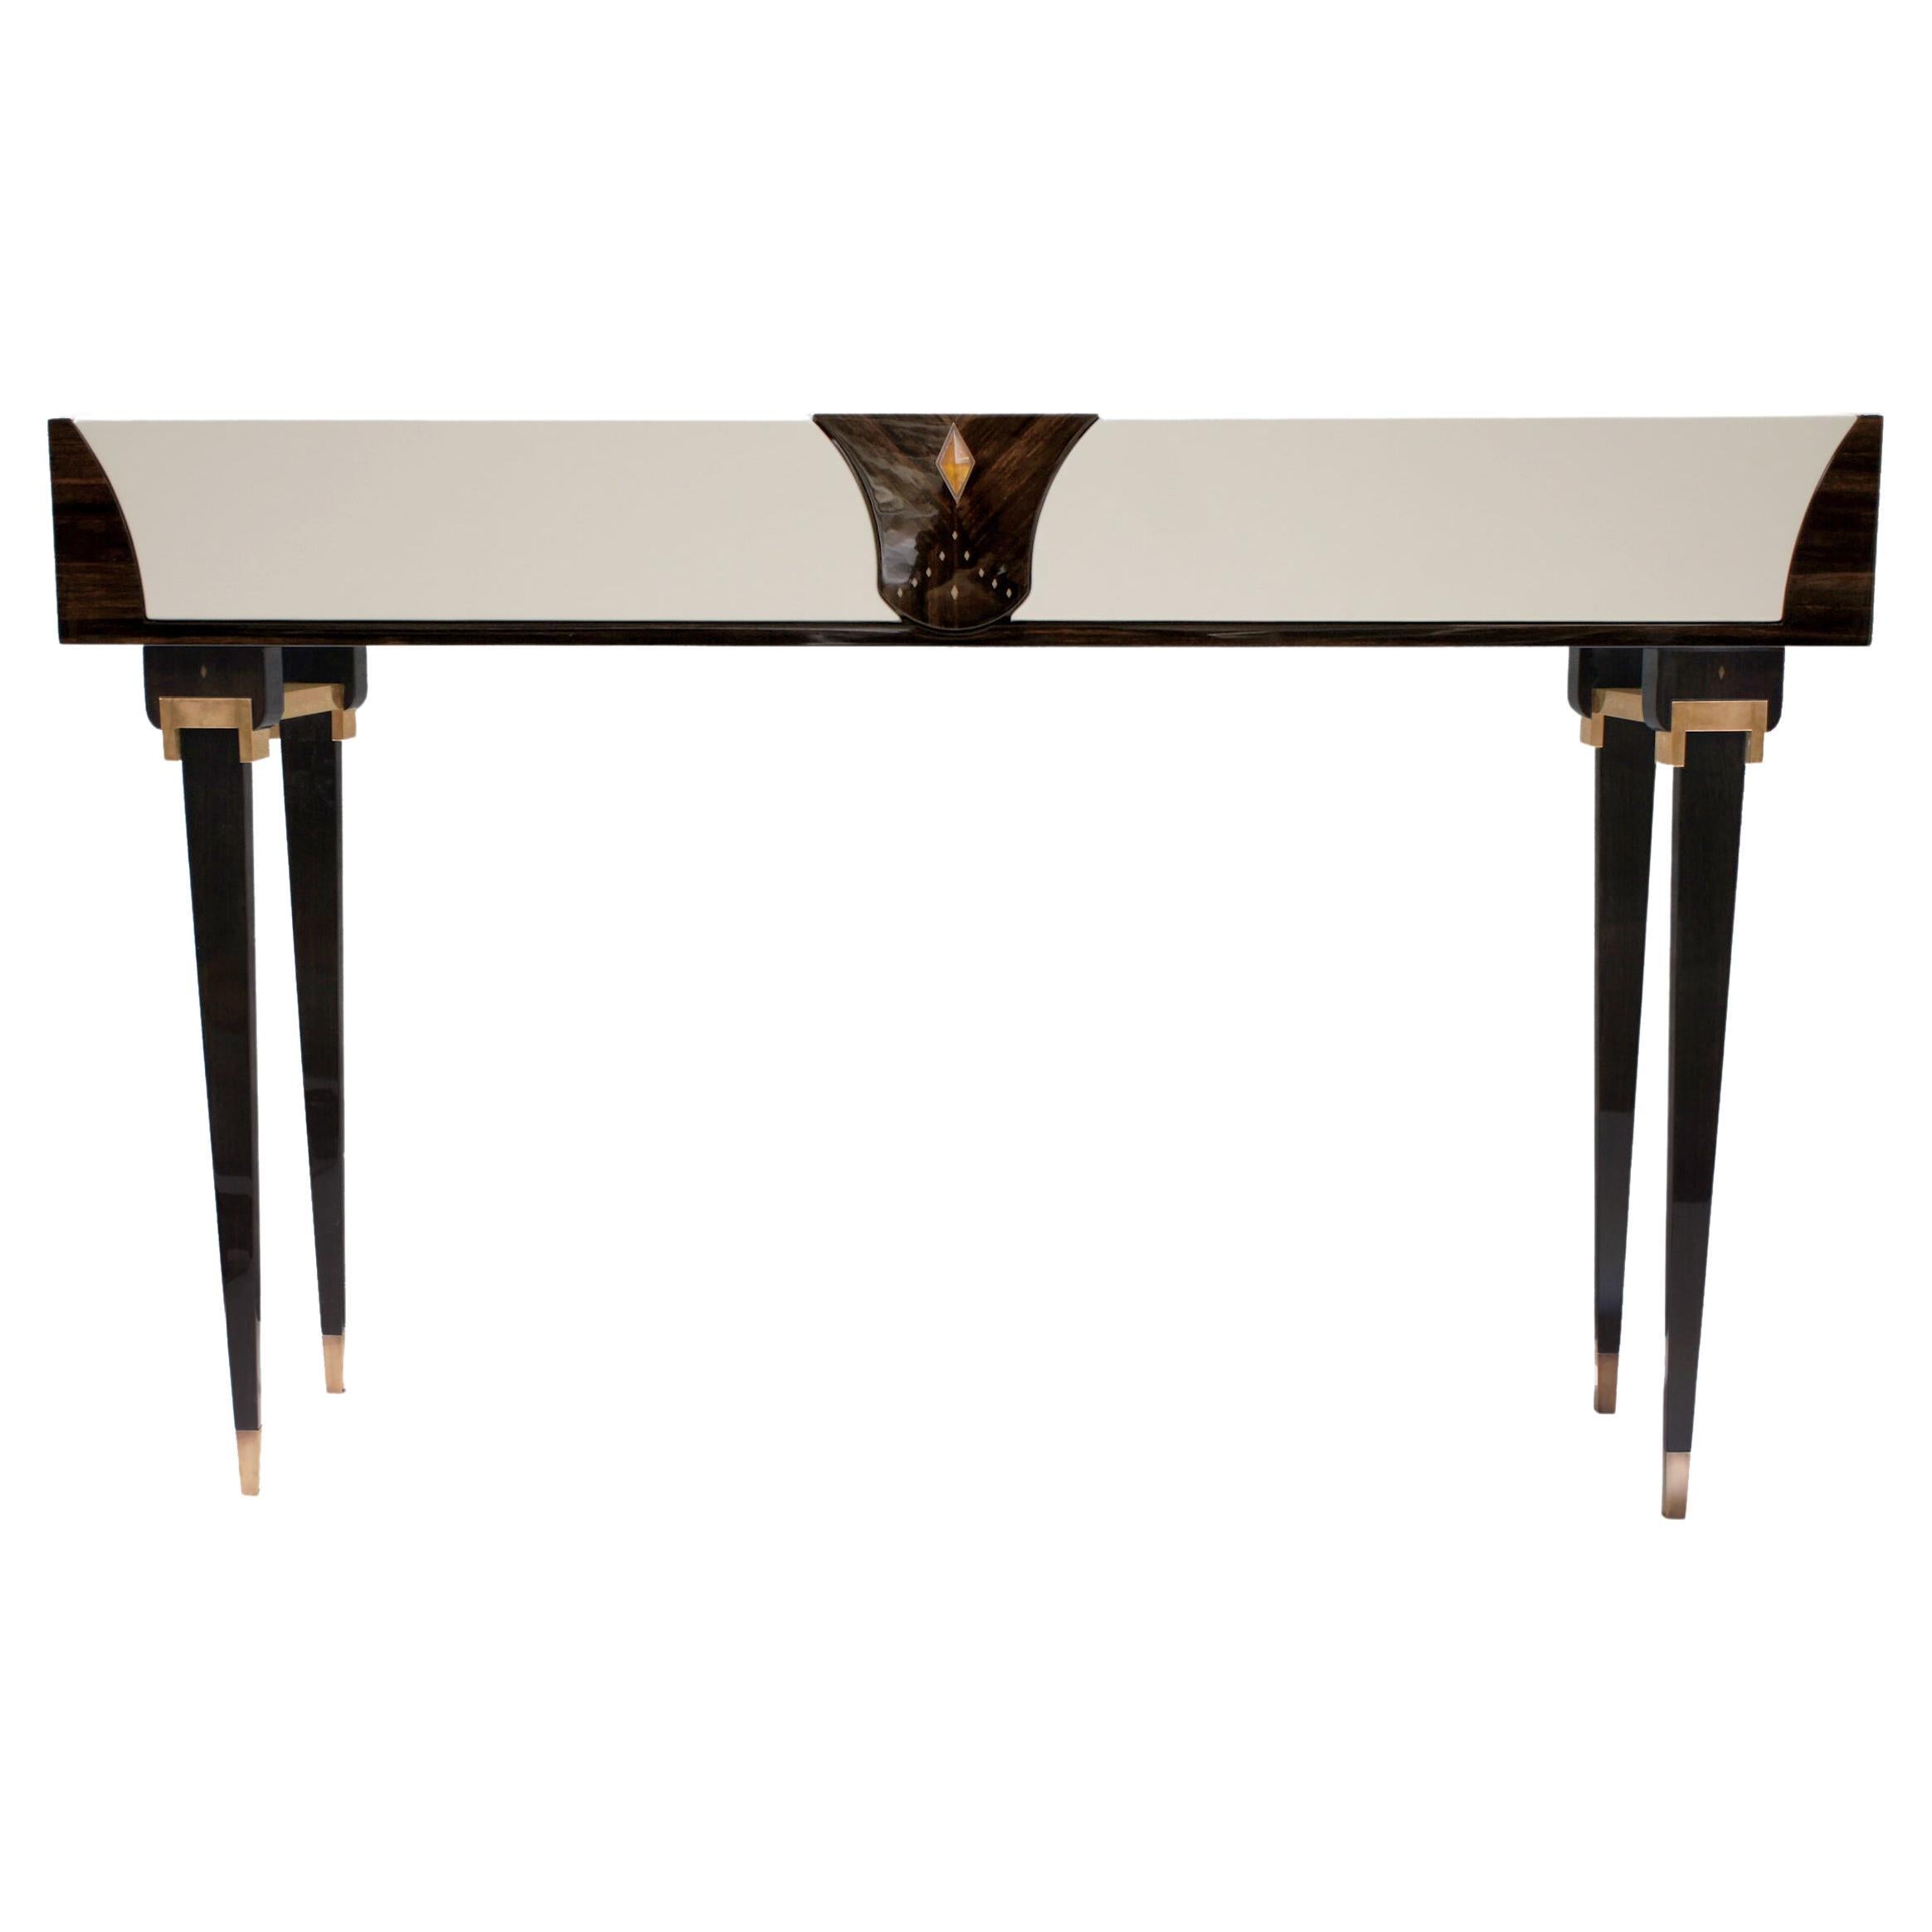 One-of-a-kind Macassar Wood and Amber Handle Console Table